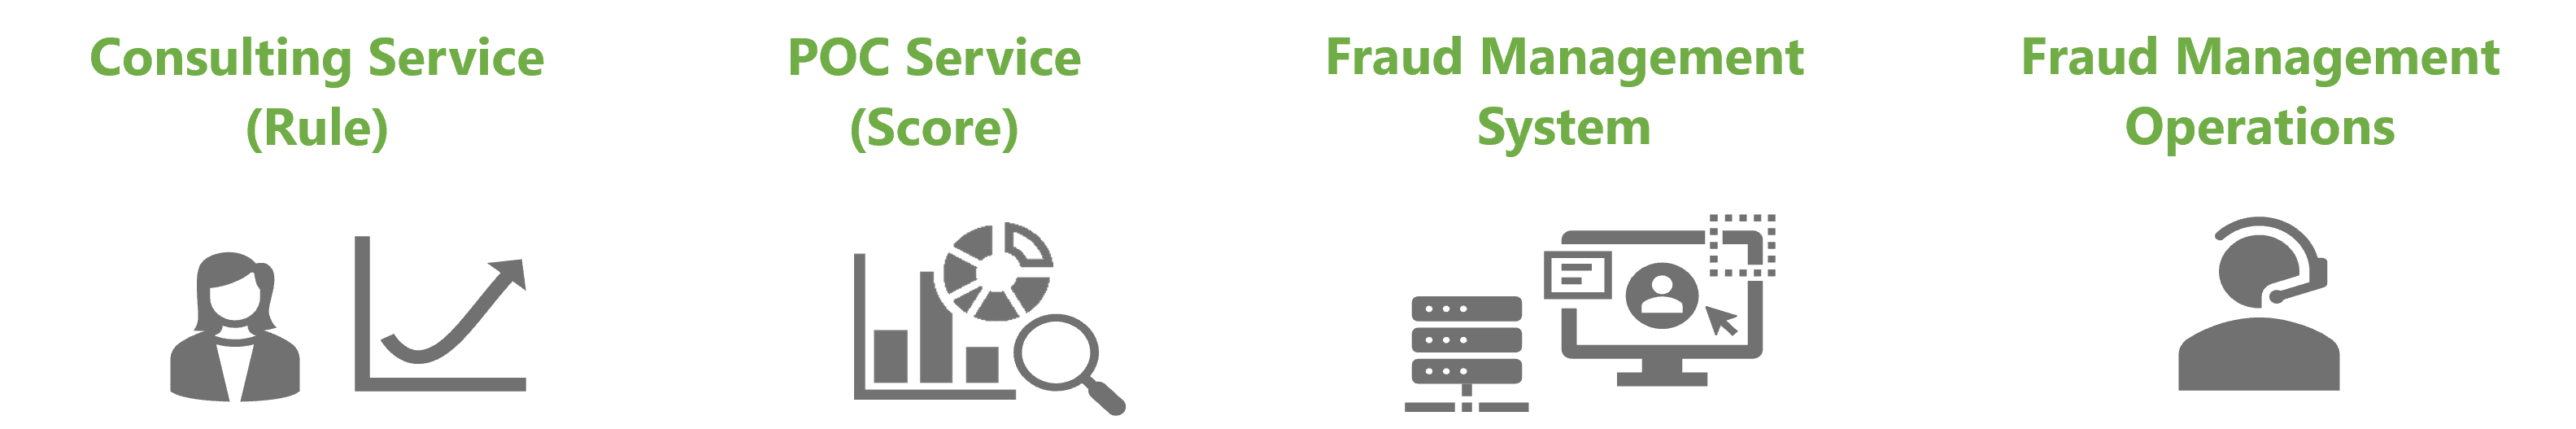 IWI Fraud Management Solutions list